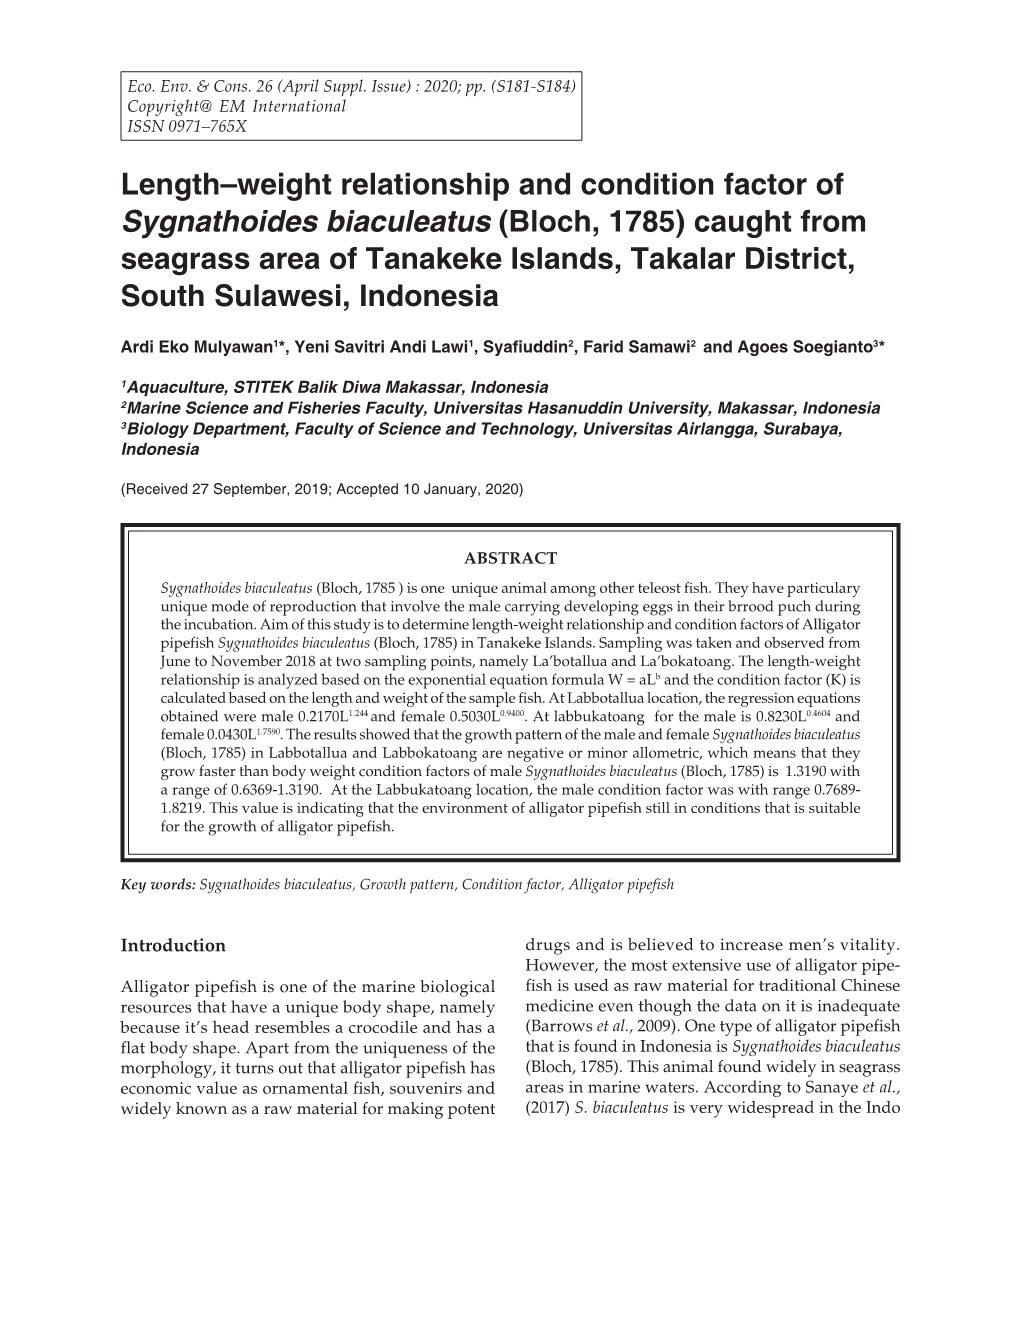 Length–Weight Relationship and Condition Factor of Sygnathoides